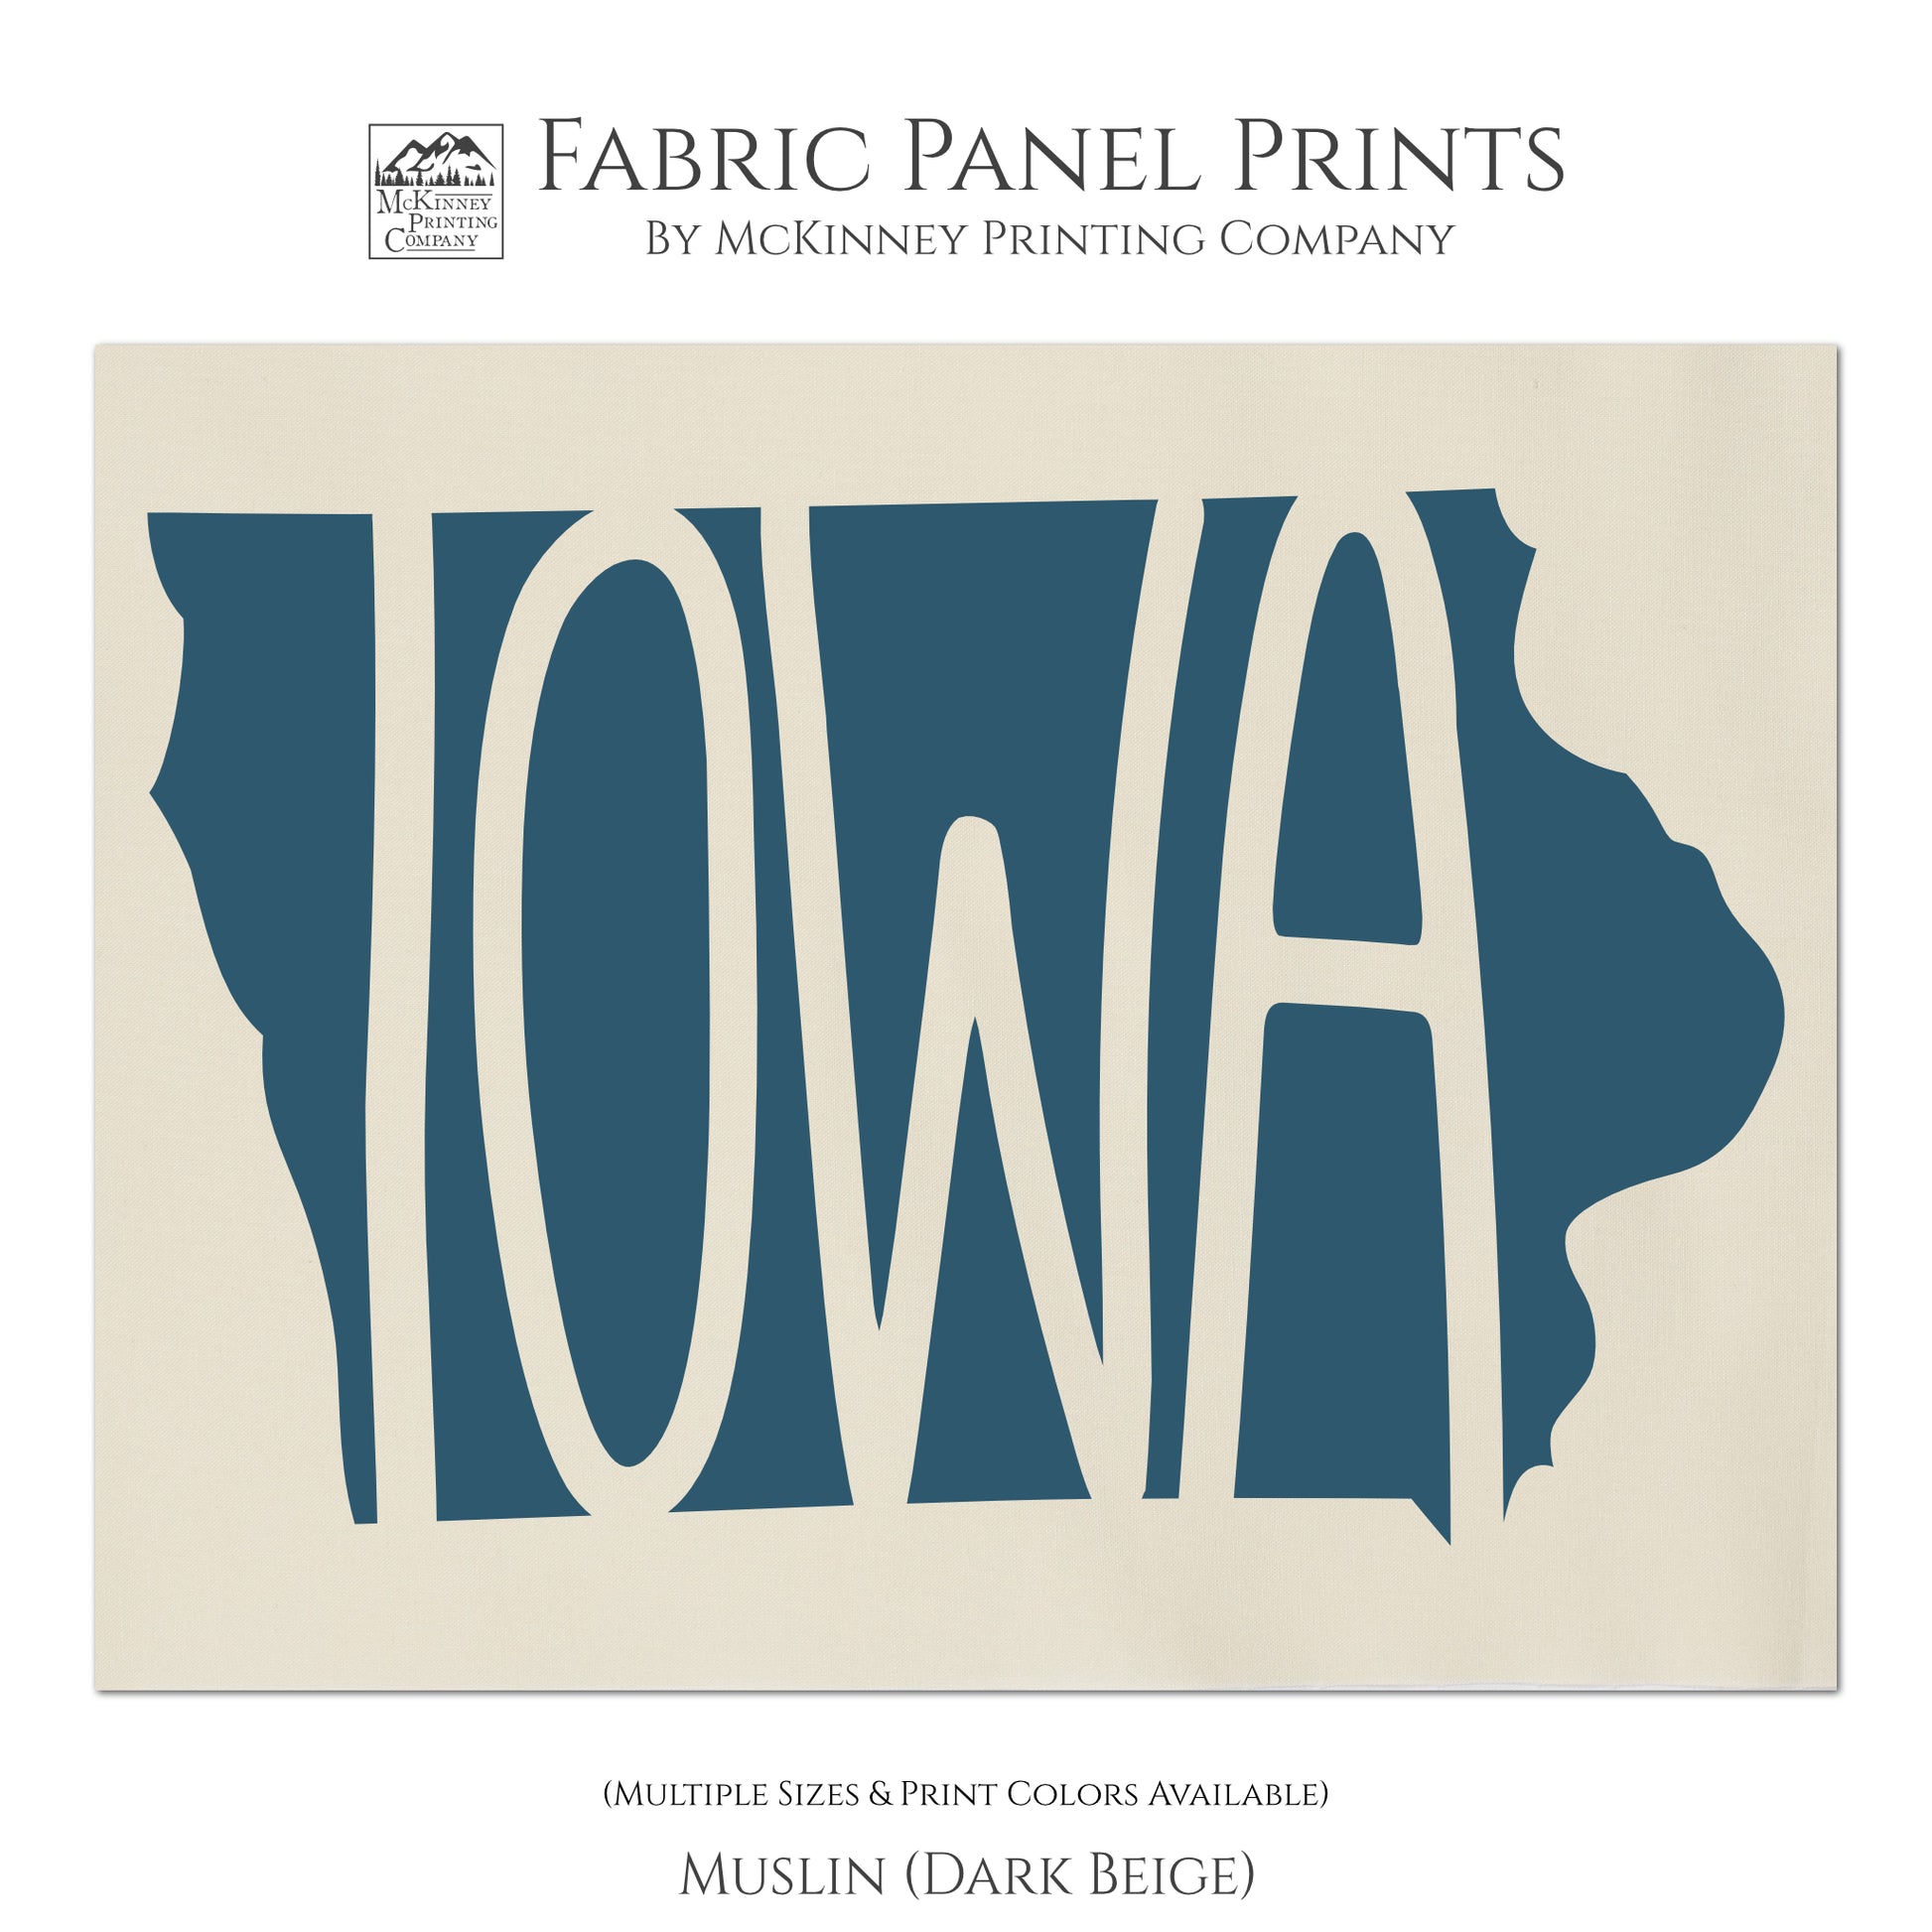 Iowa - Fabric Panel Print, Large | Small Cotton Quilt Block, Craft, State Silhouette, Pillow, Towel, TShirt - Muslin